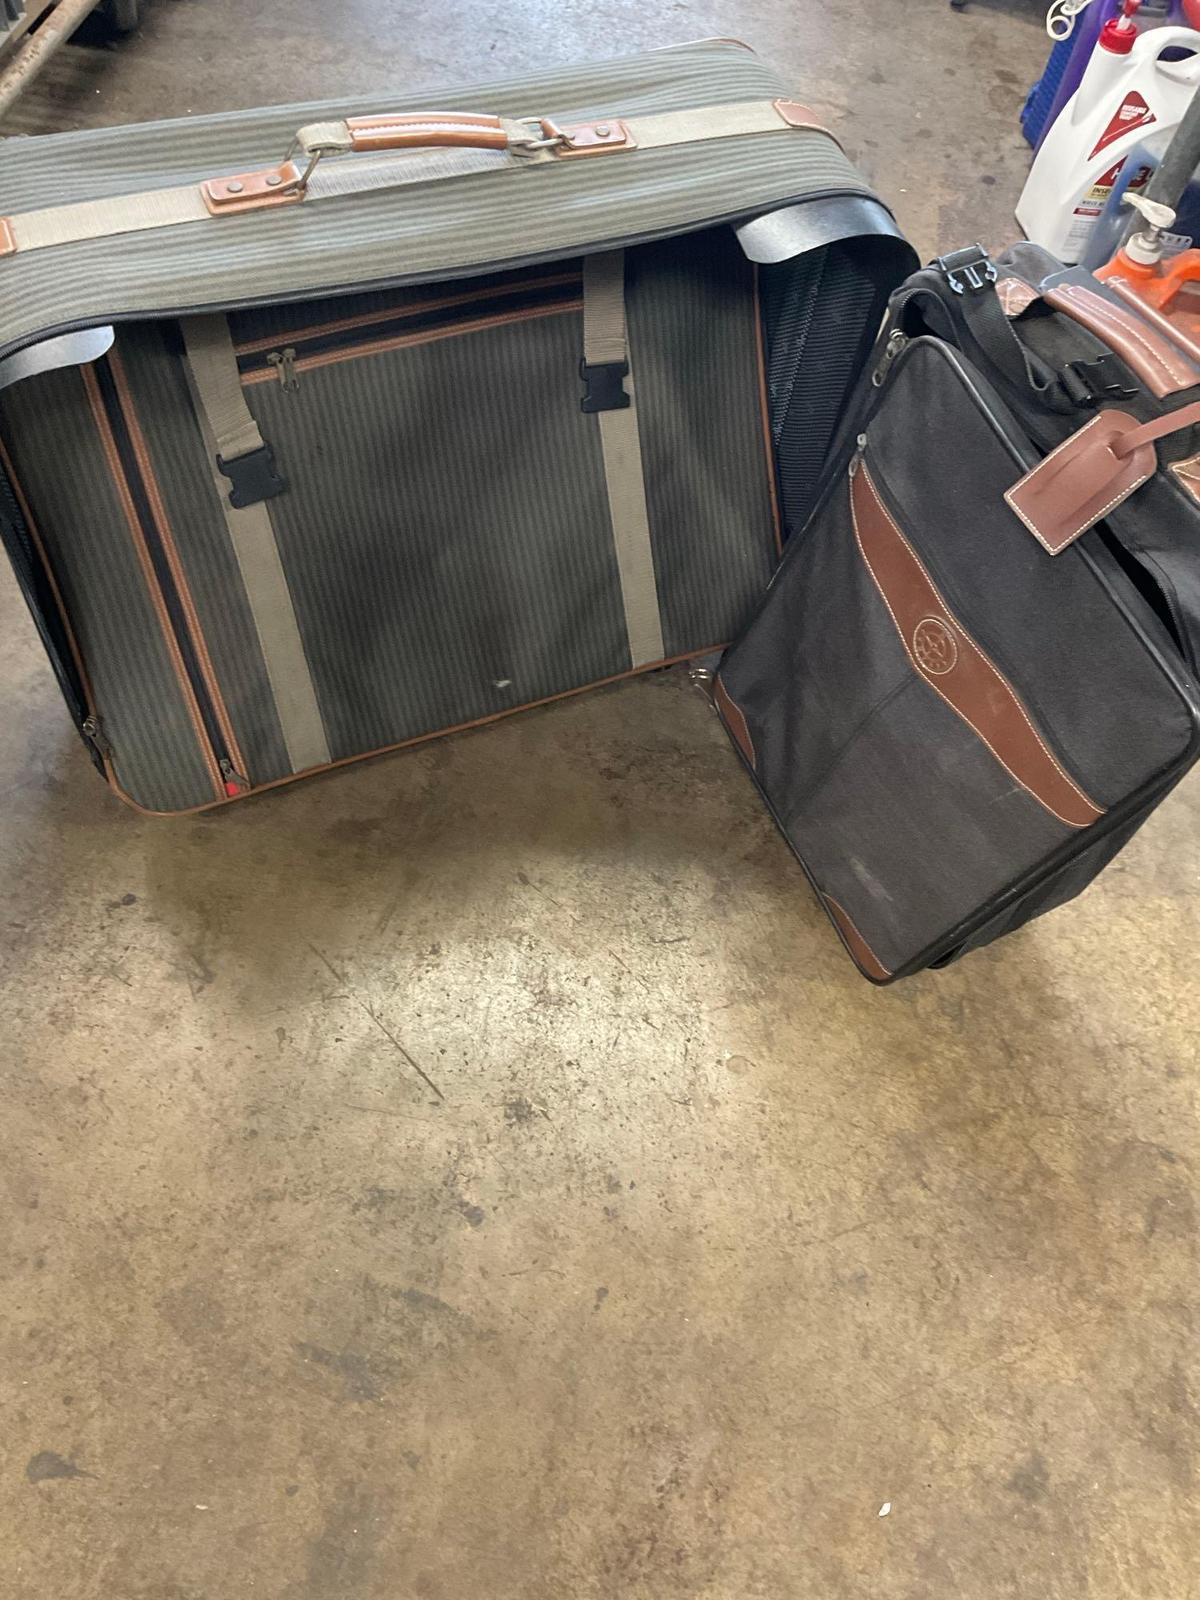 Palm Spring & N-Compass rolling luggage. 2 pieces